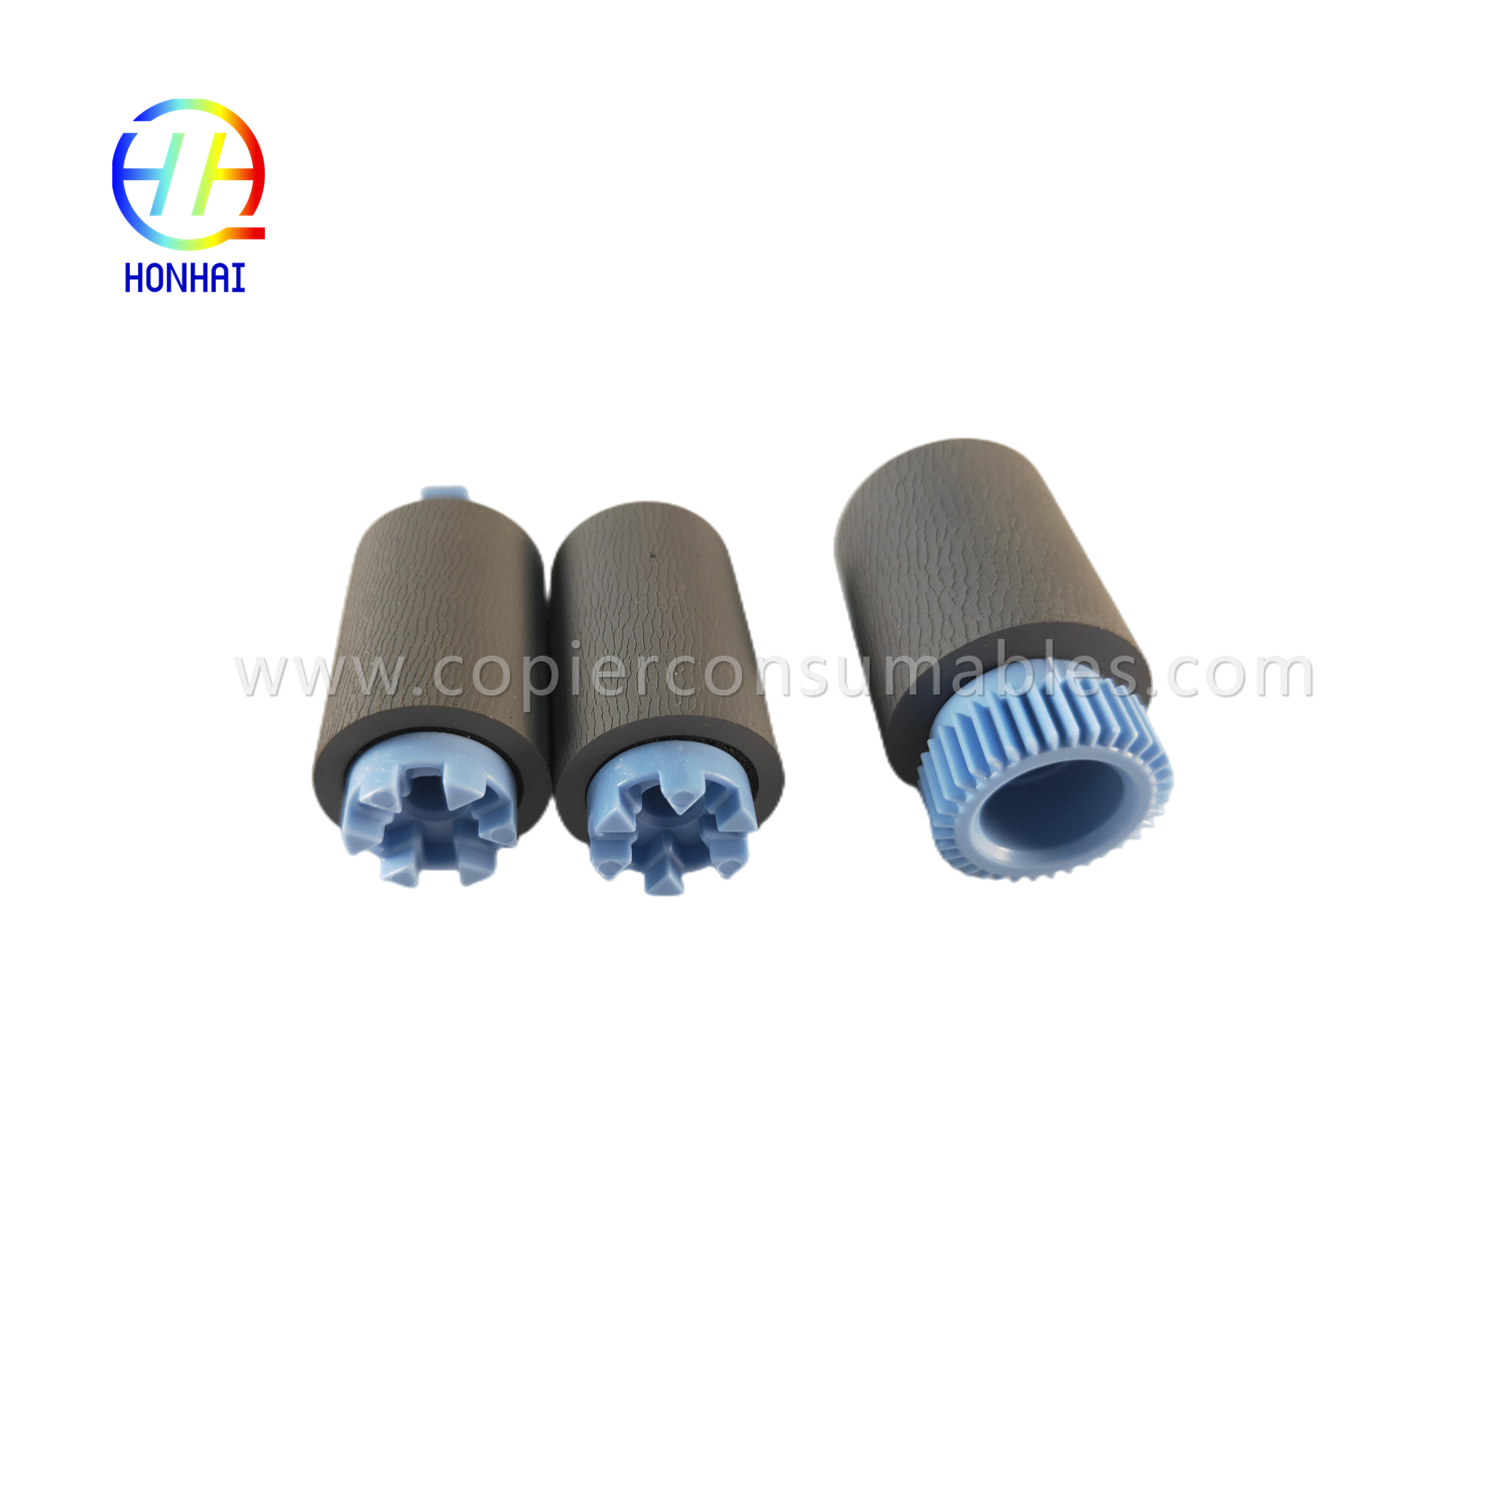 https://www.copierconsumables.com/tray-2-5-pickup-feed-separation-roller-set-for-hp-a7w93-67082-mfp-785f-780dn-e77650z-e77660z-e77650dn-7d-e707d p77750z-p77760z-p75050dn-p75050dw-product/